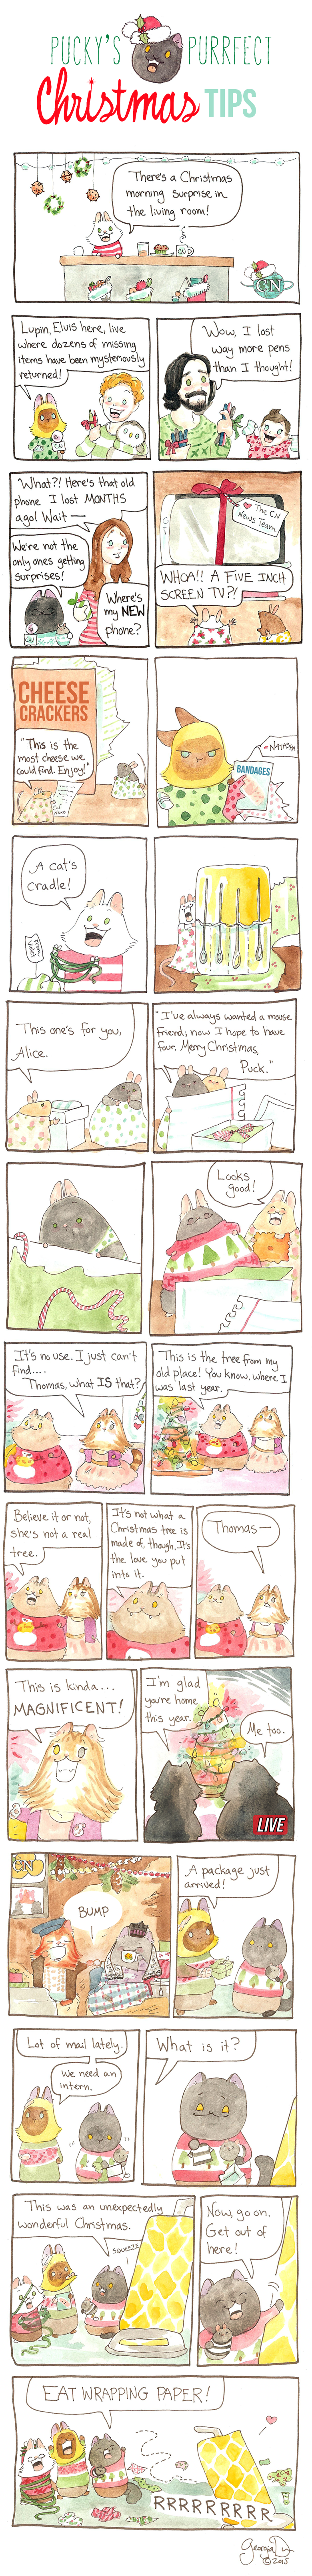 Pucky’s Purrfect Christmas Tips Part Seven